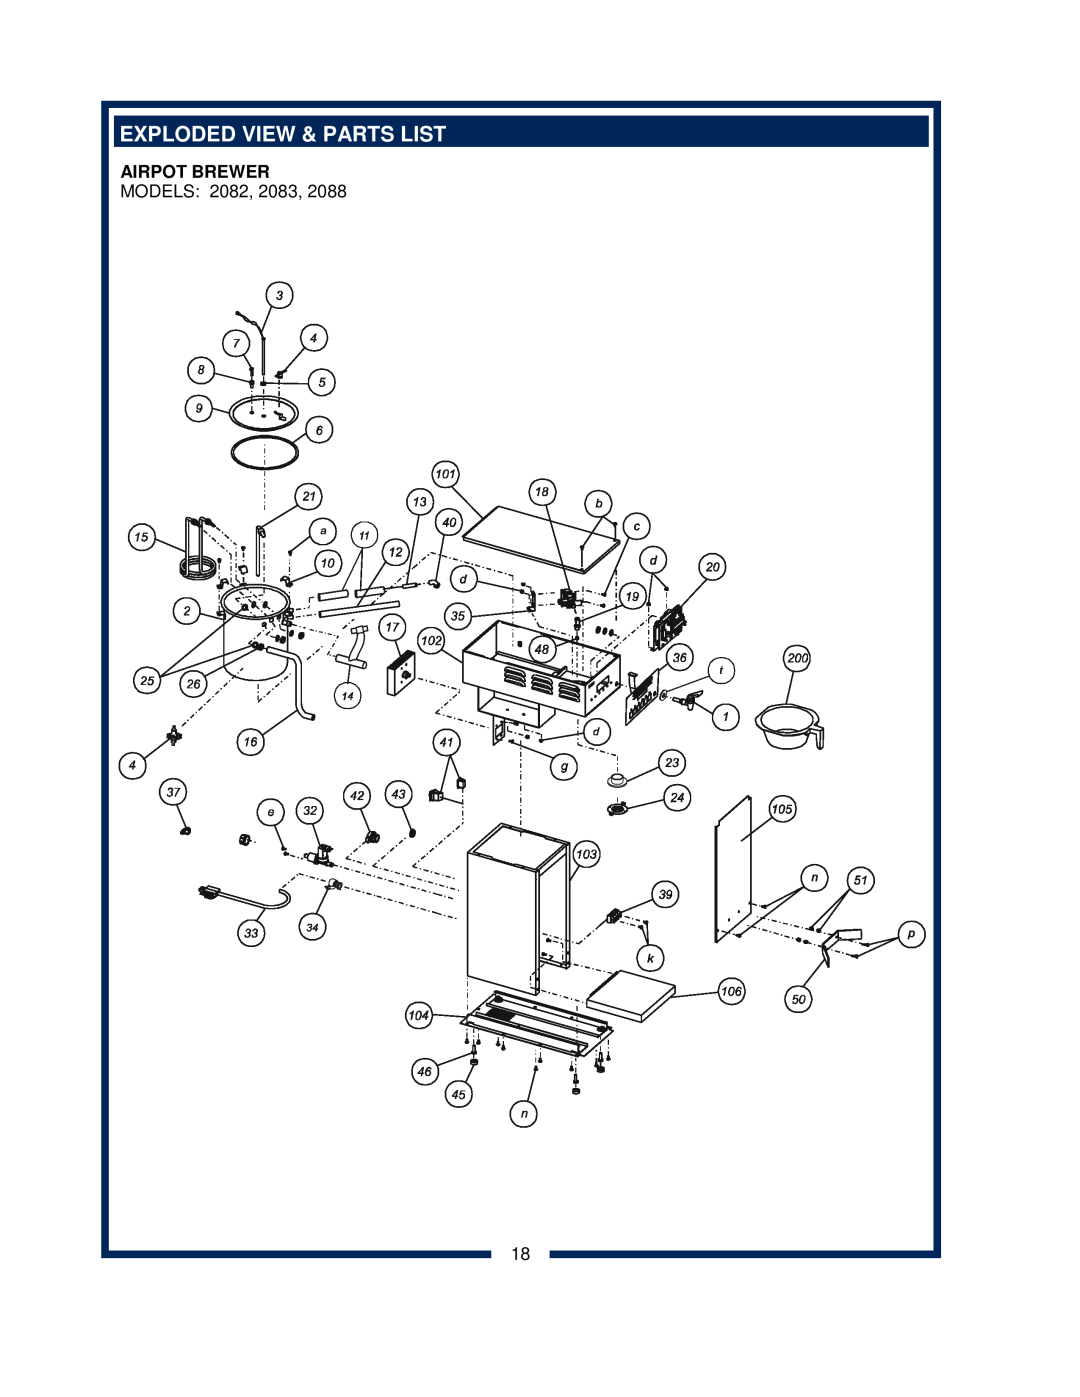 Bloomfield 2088EX, 2086EX, 2080, 2082 owner manual Exploded View & Parts List, Airpot Brewer 